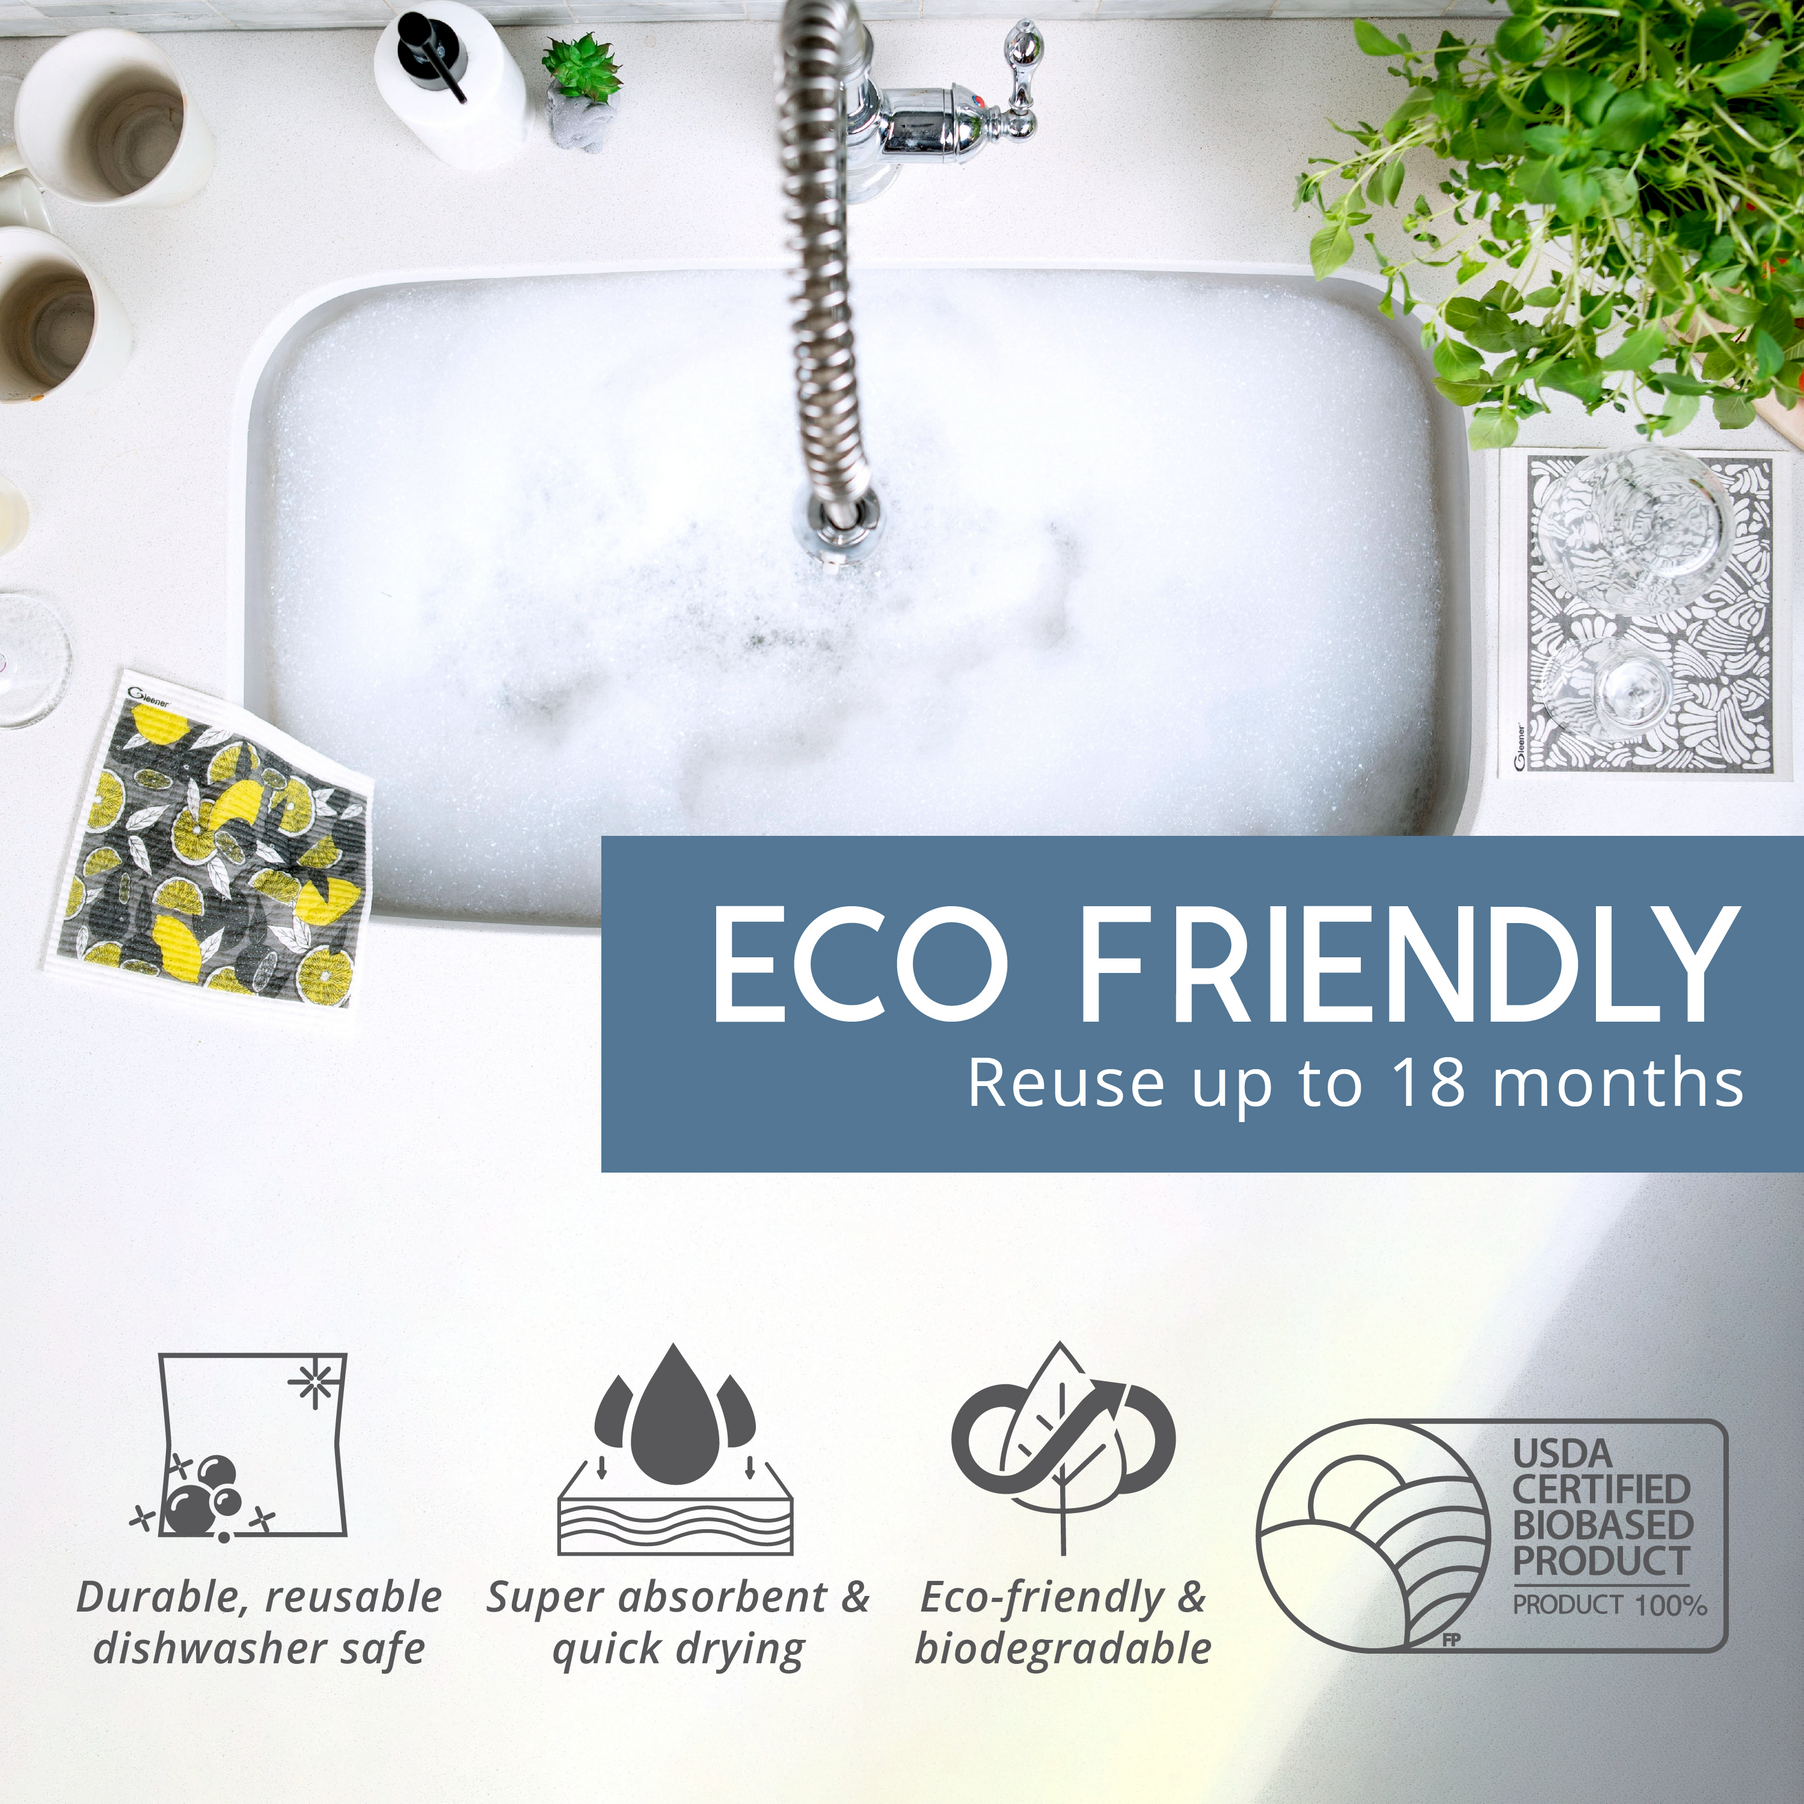 Super Eco Cloth | 2-pack | Nature Collection